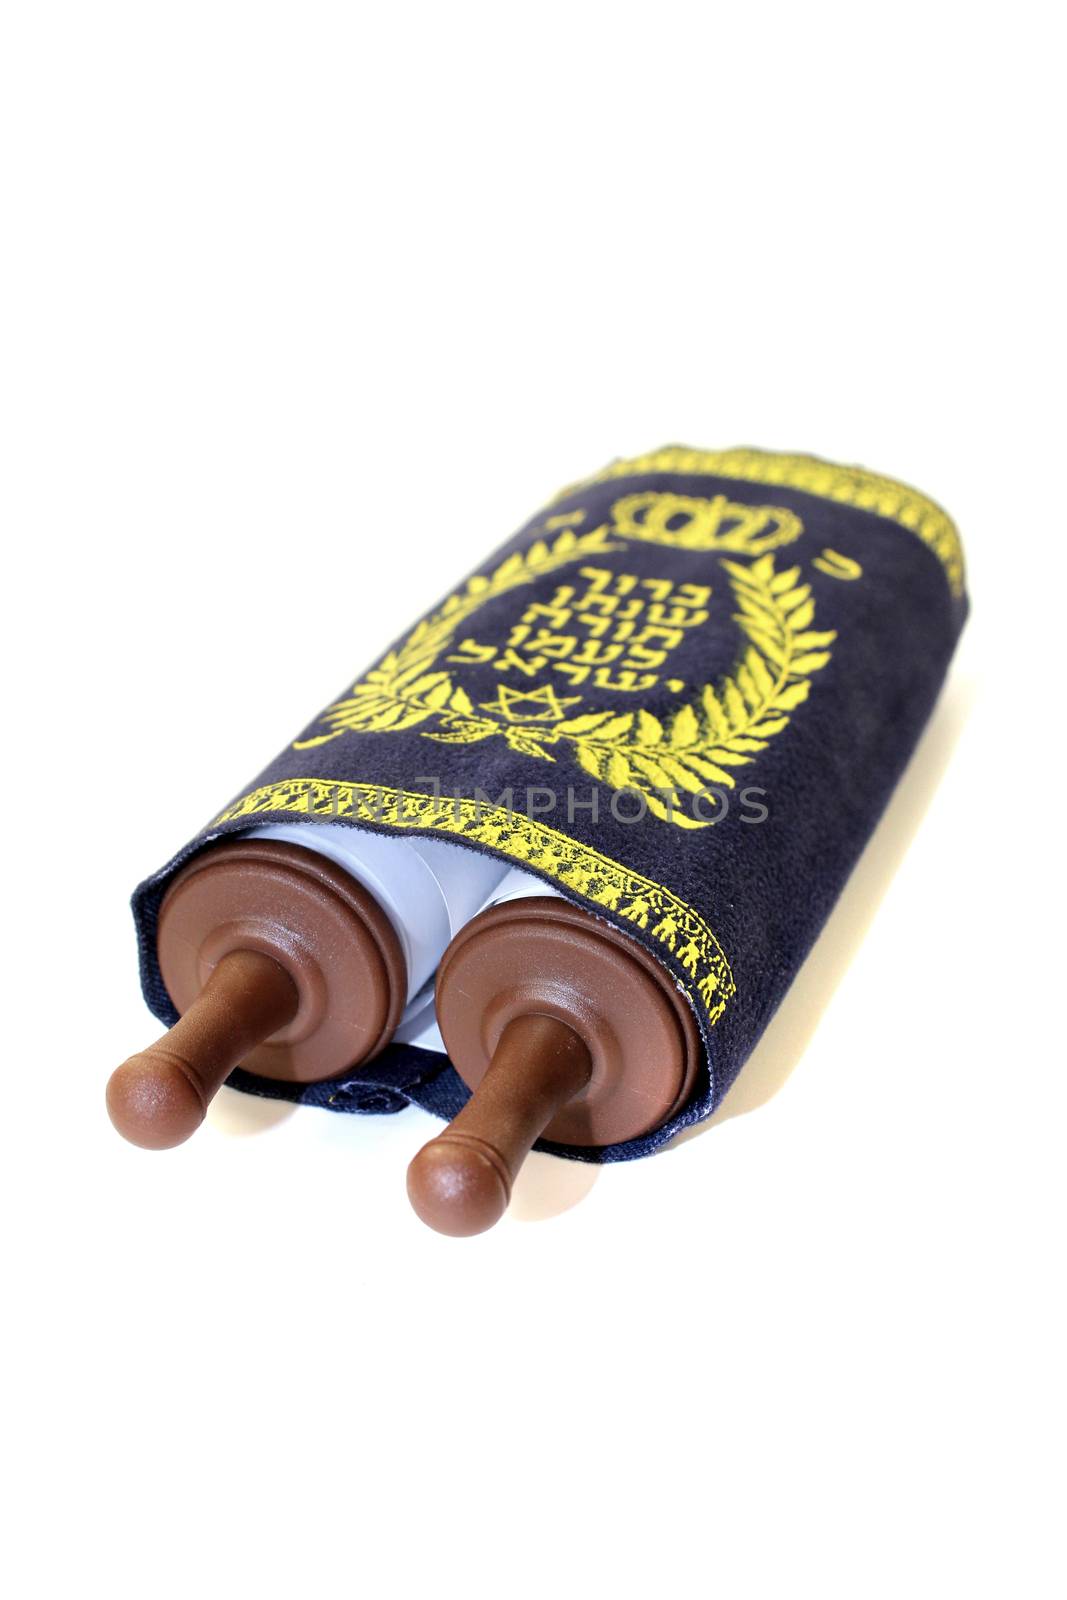 Torah scroll with cover on bright background